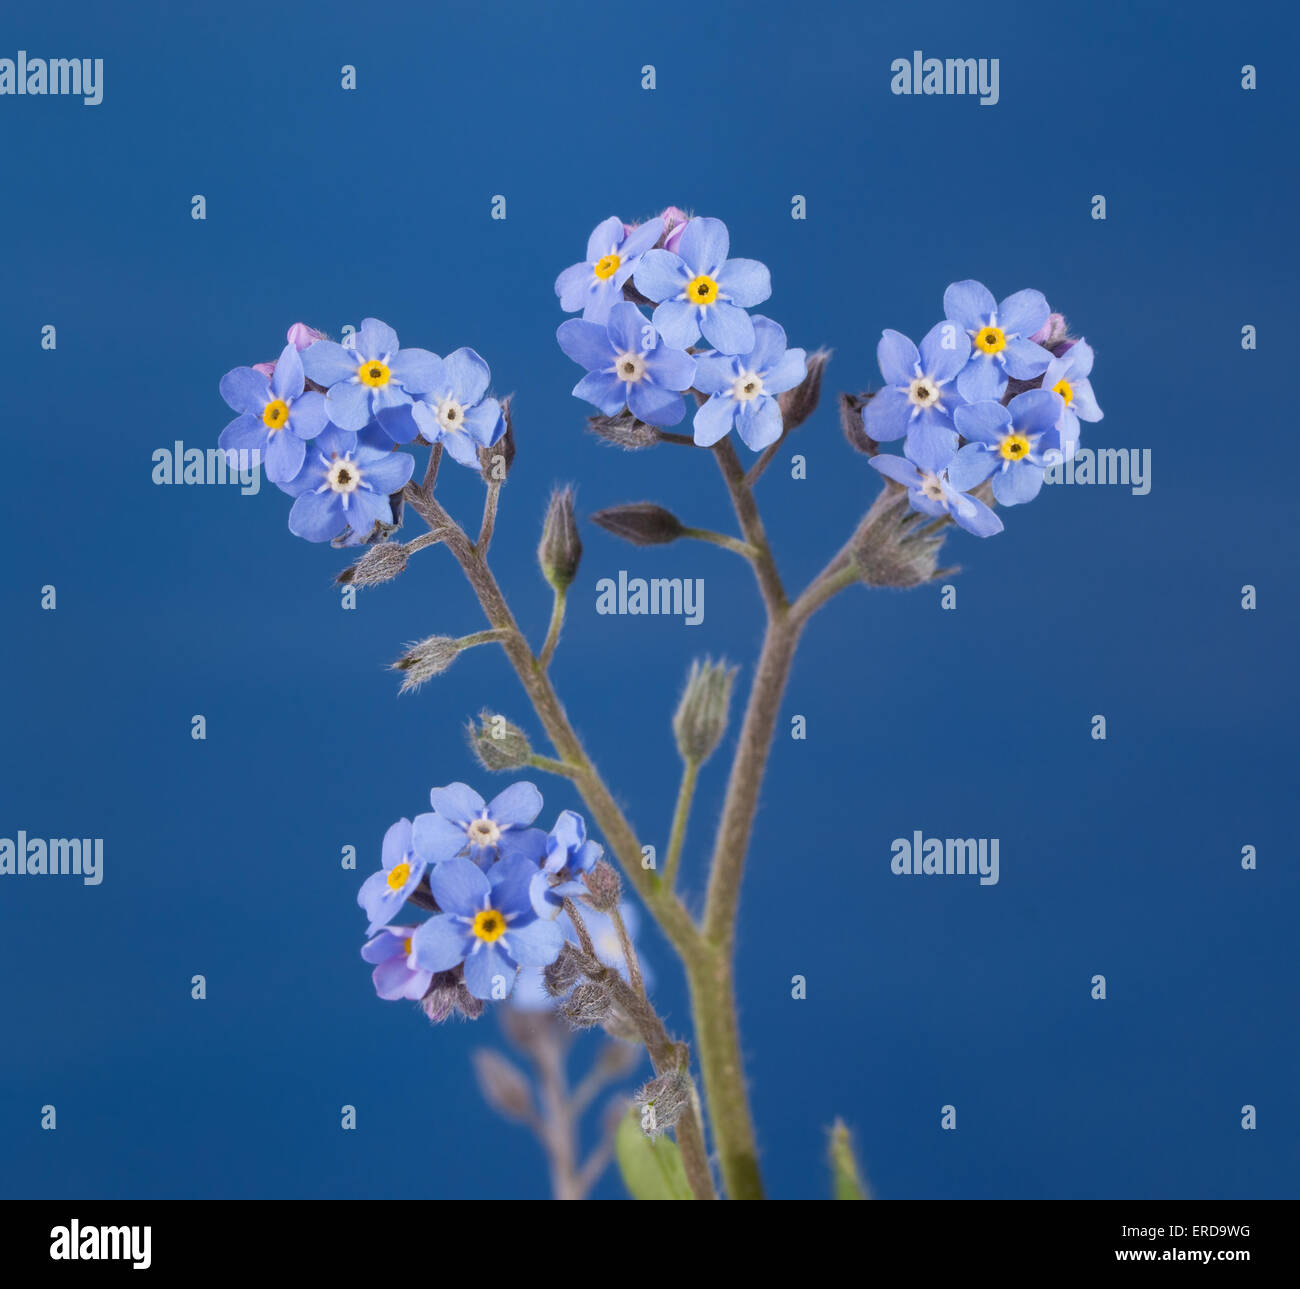 Dainty Forget-me-not flowers against blue background Stock Photo